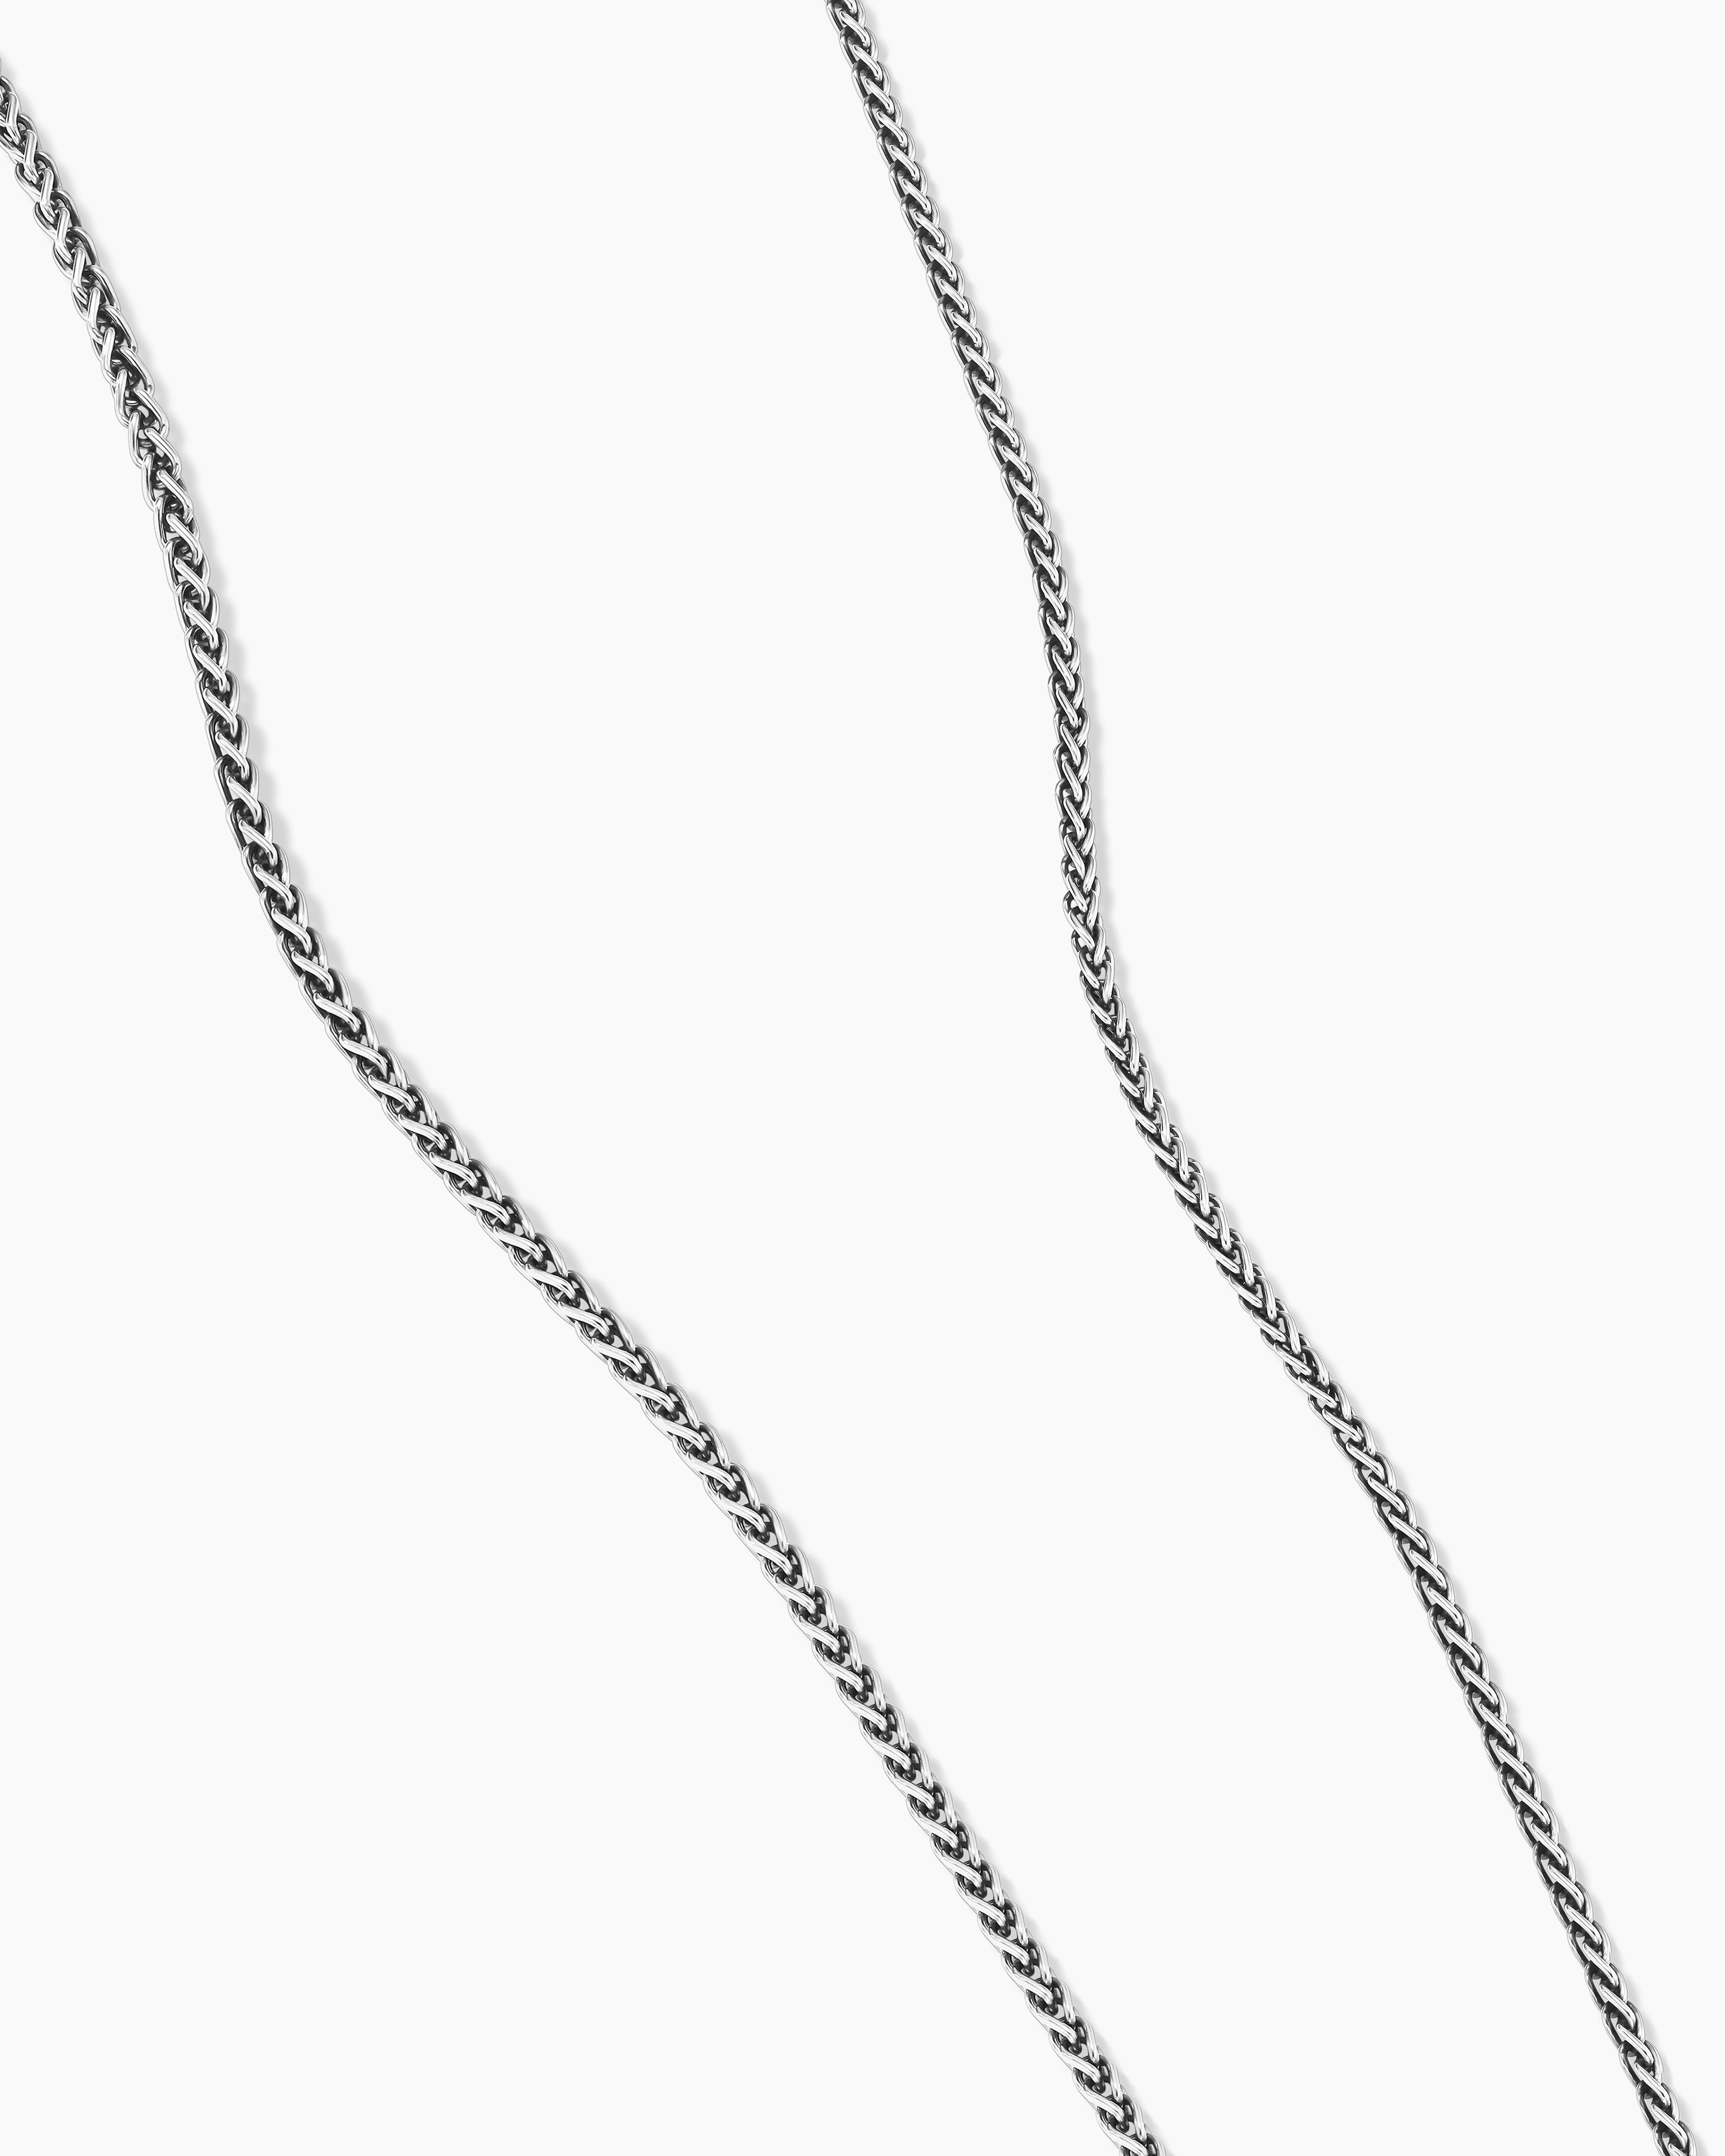 Wheat Chain Necklace in Sterling Silver, 2.5mm